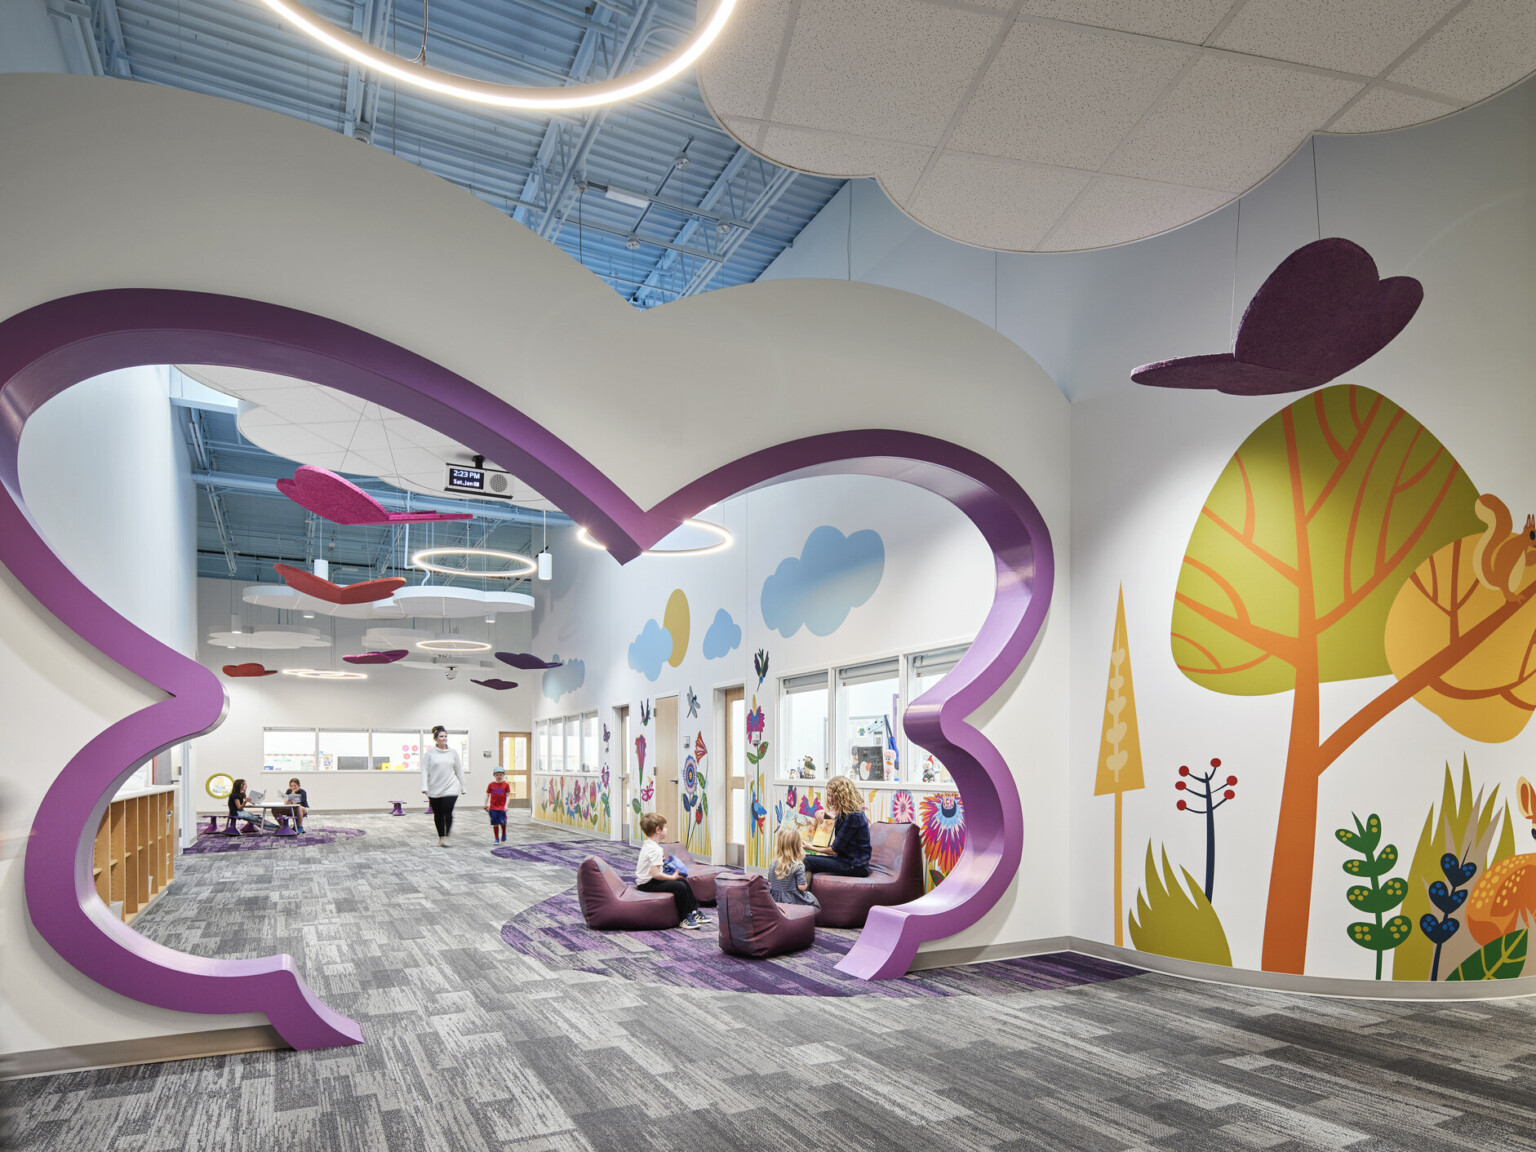 North Kansas City Early Education Center interior hallway with bright mural of trees and abstract-shaped cutout in purple in hall